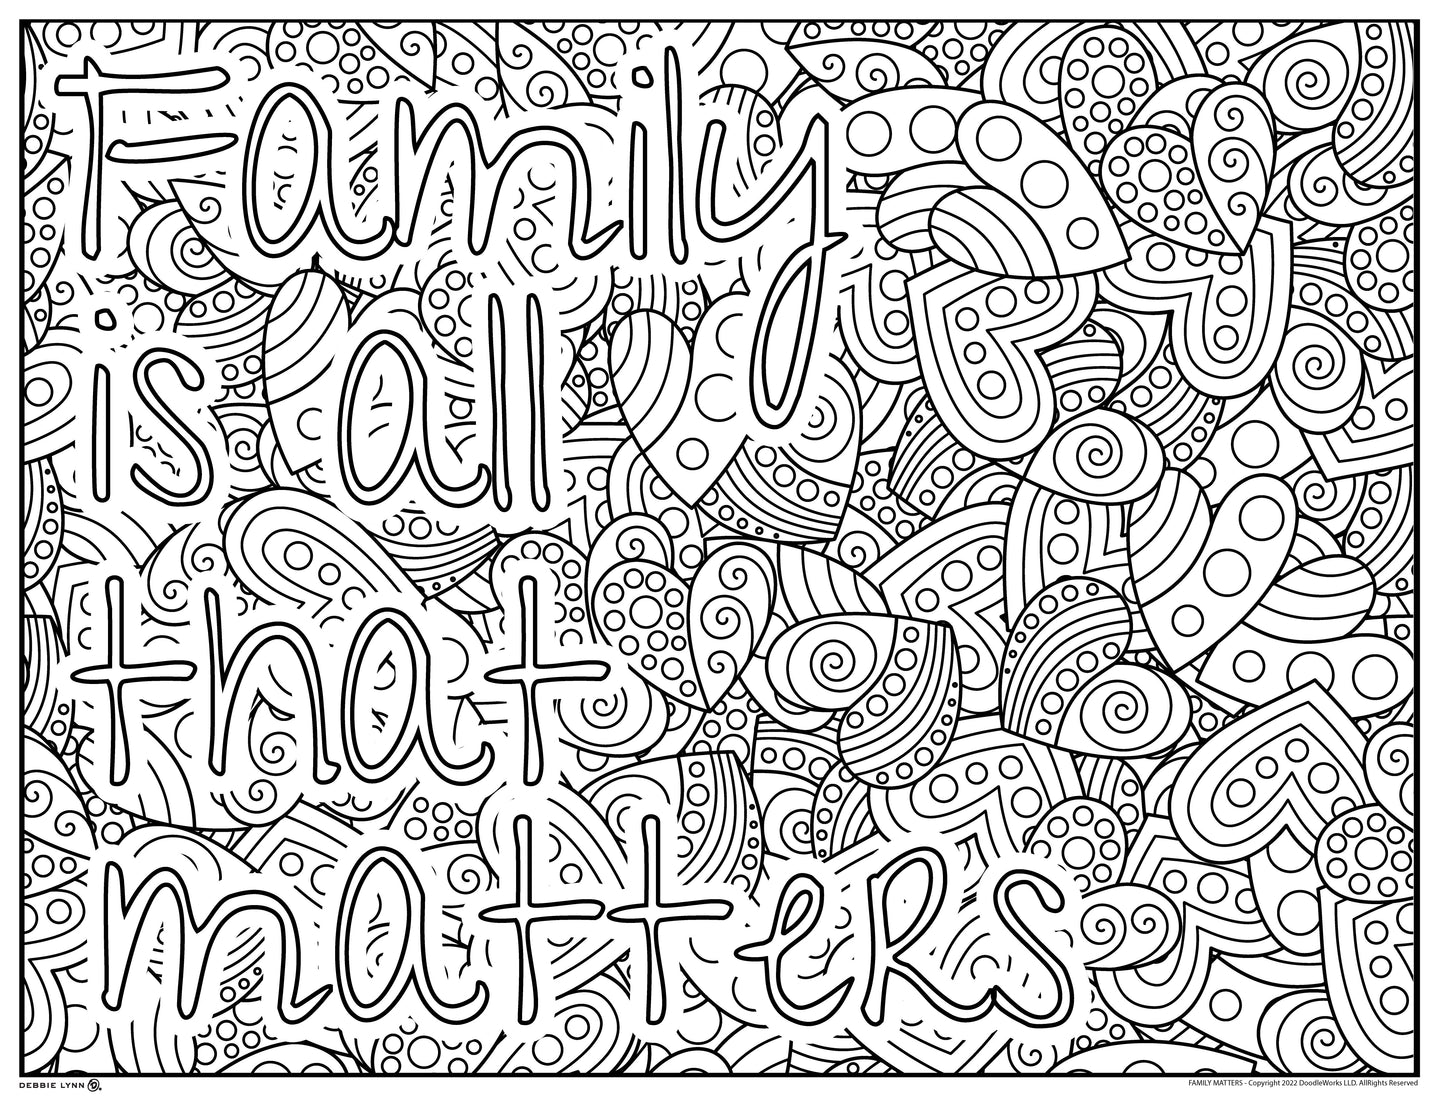 Family Matters Personalized Giant Coloring Poster  46"x60"